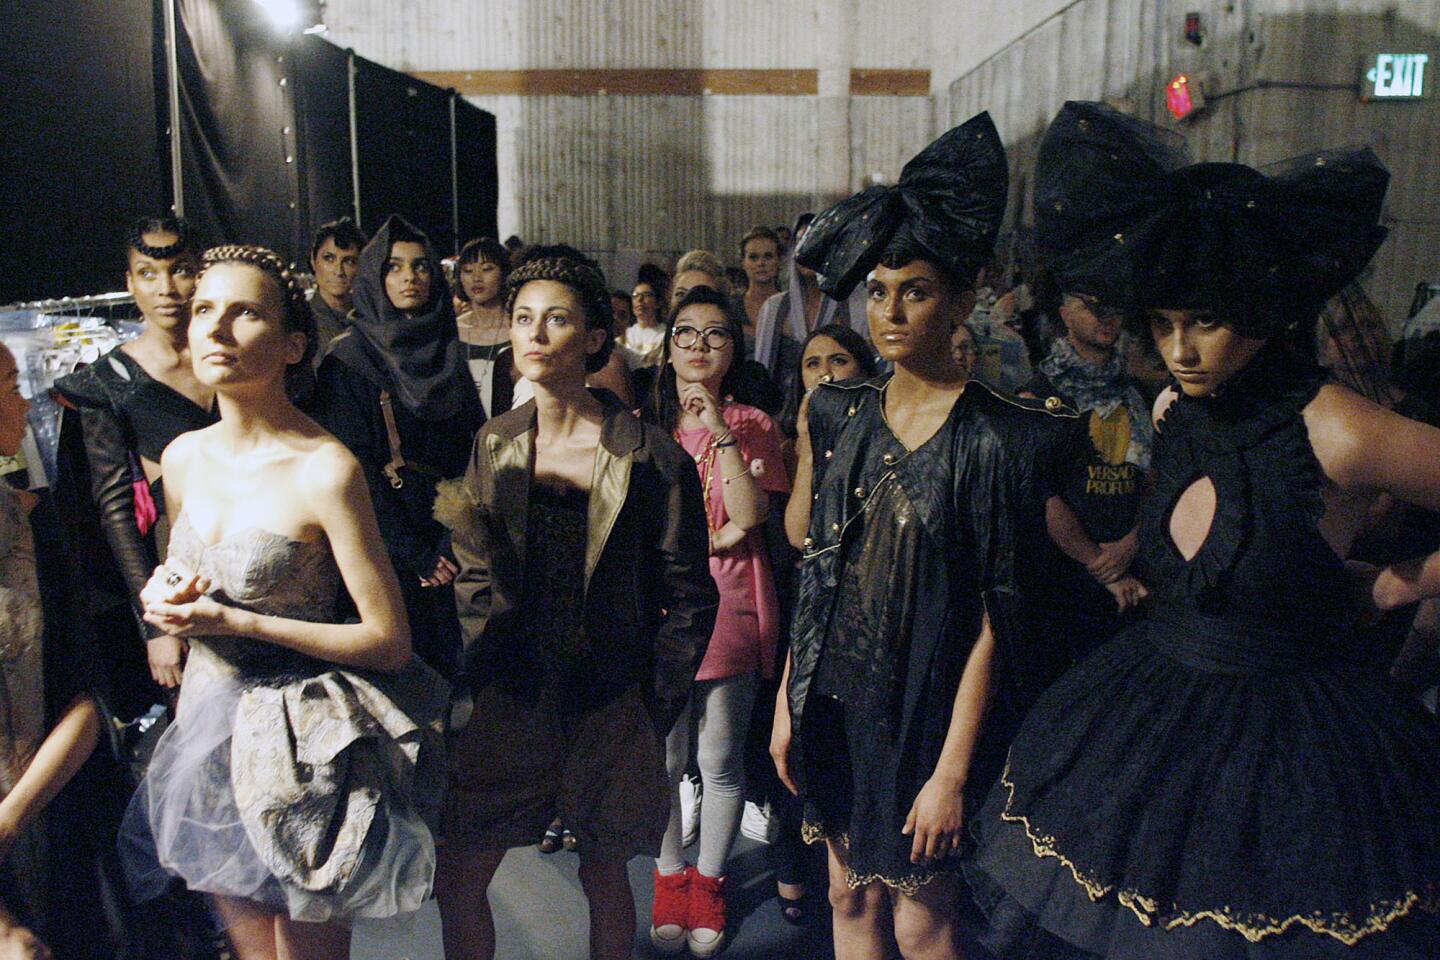 Models and fashion designers look up at the projector screen during Woodbury University's "Neo-tribes" runway event, which took place at Los Angeles Center Studios on Thursday, May 2, 2013.